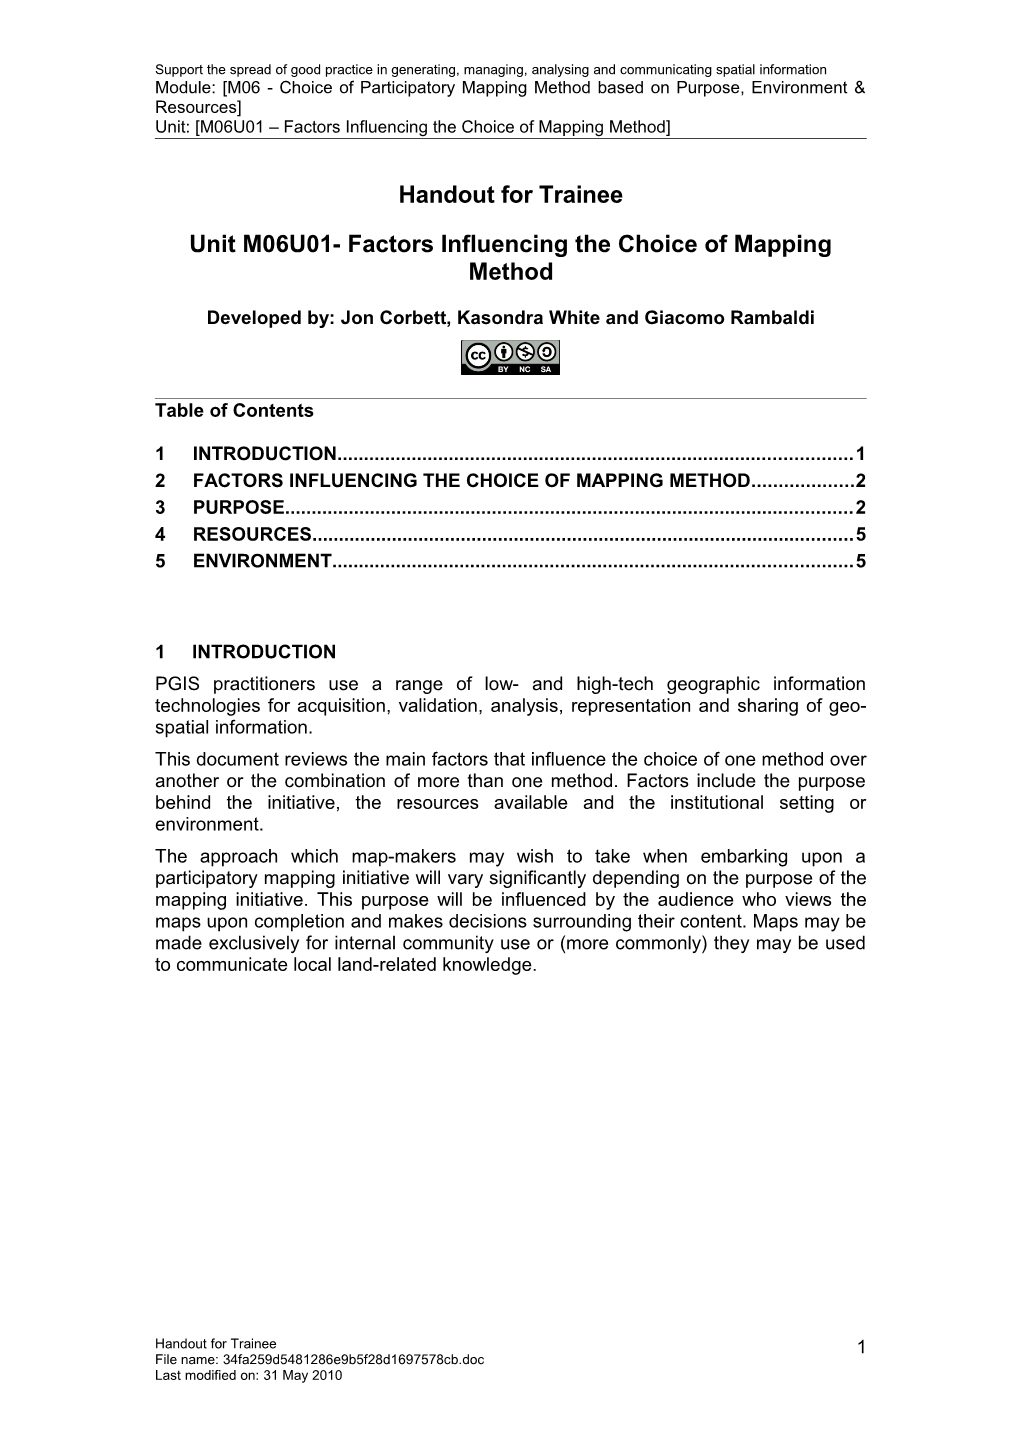 Handout for Trainee - Factors Influencing the Choice of Mapping Method